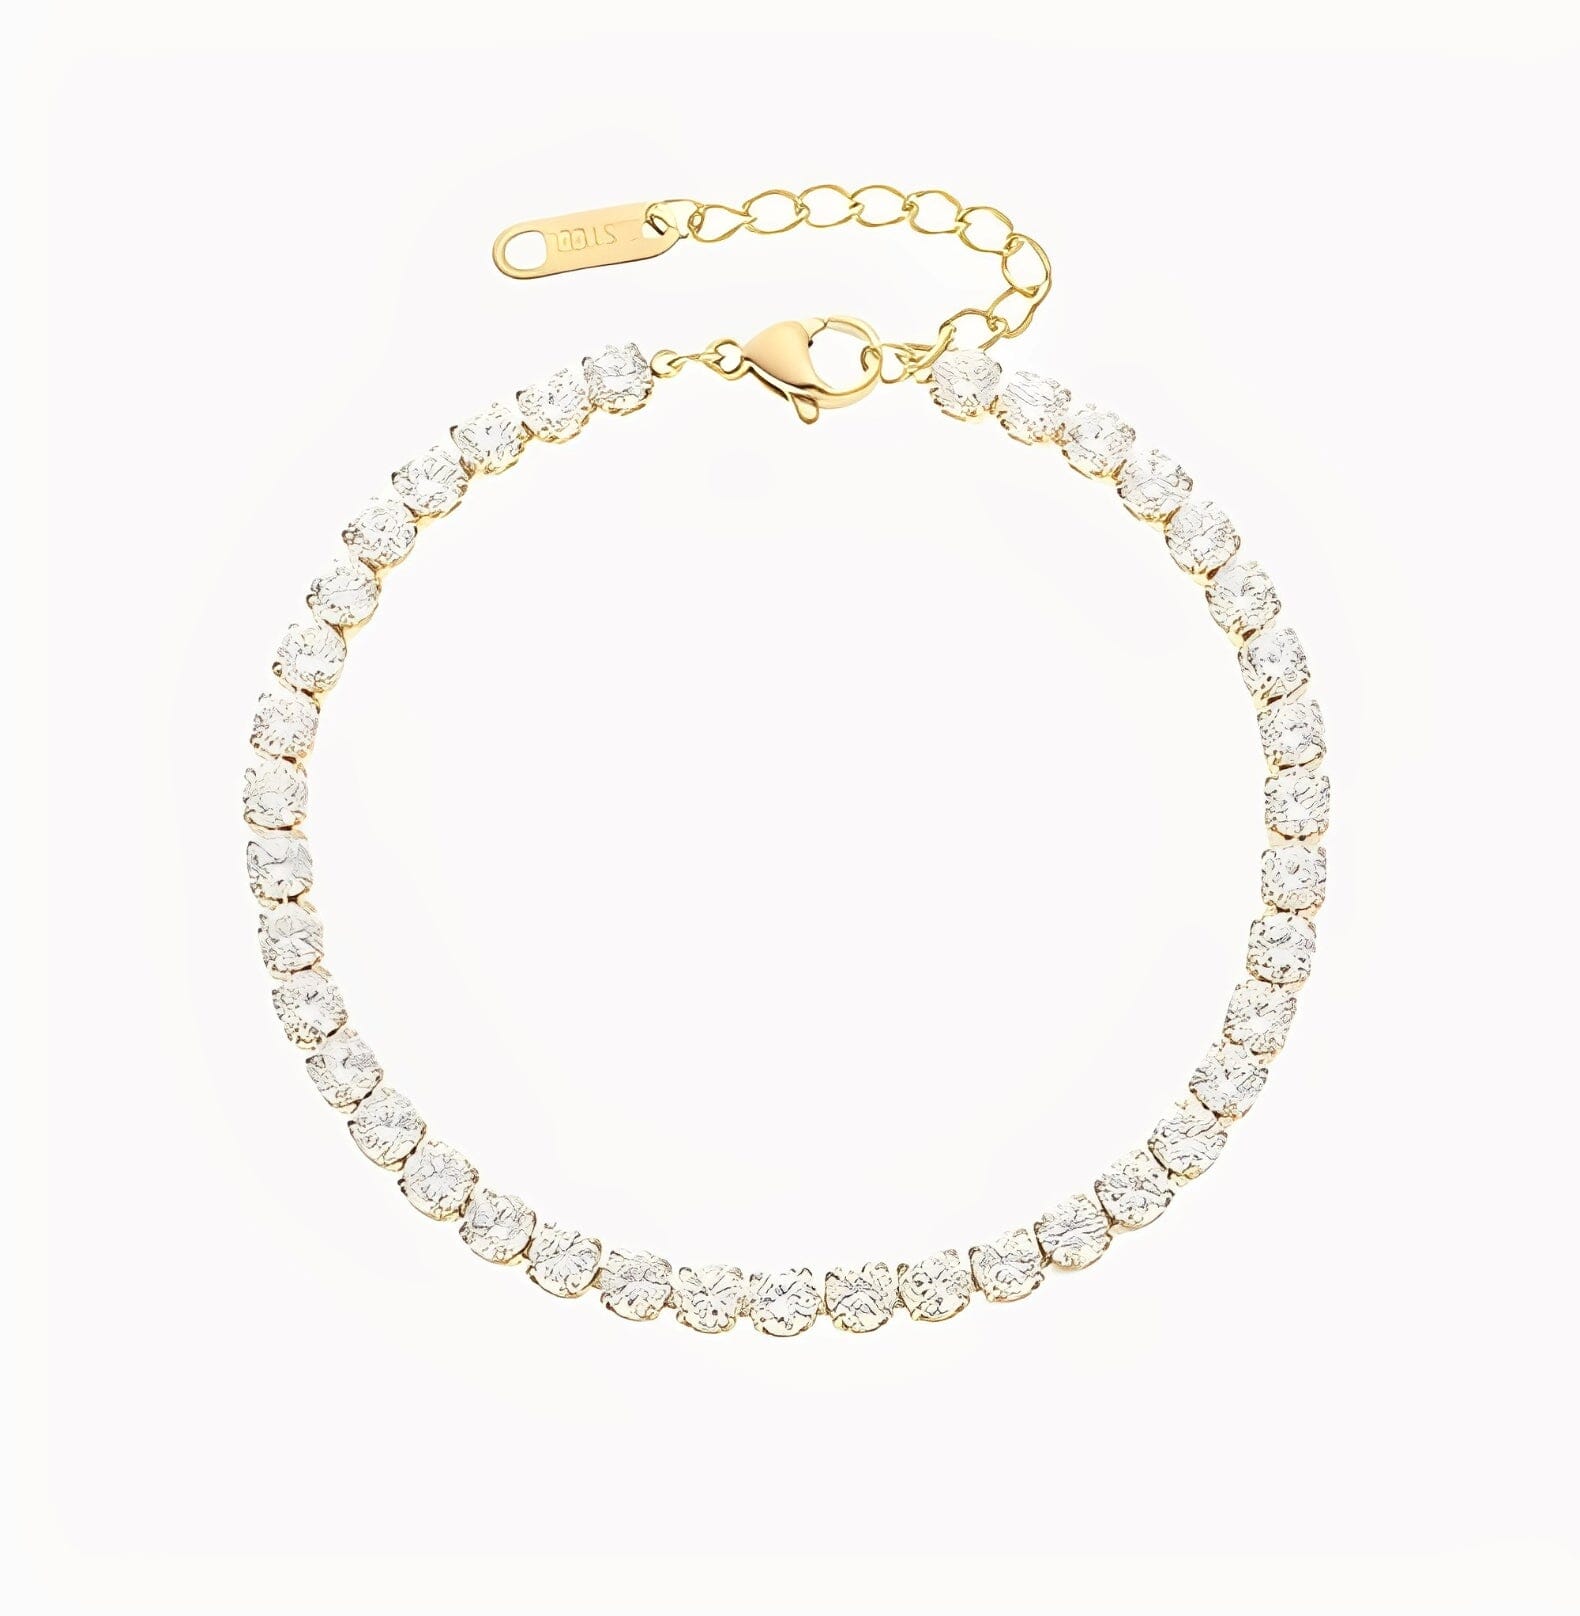 TENNIS BRACELET - GOLD braclet Yubama Jewelry Online Store - The Elegant Designs of Gold and Silver ! 